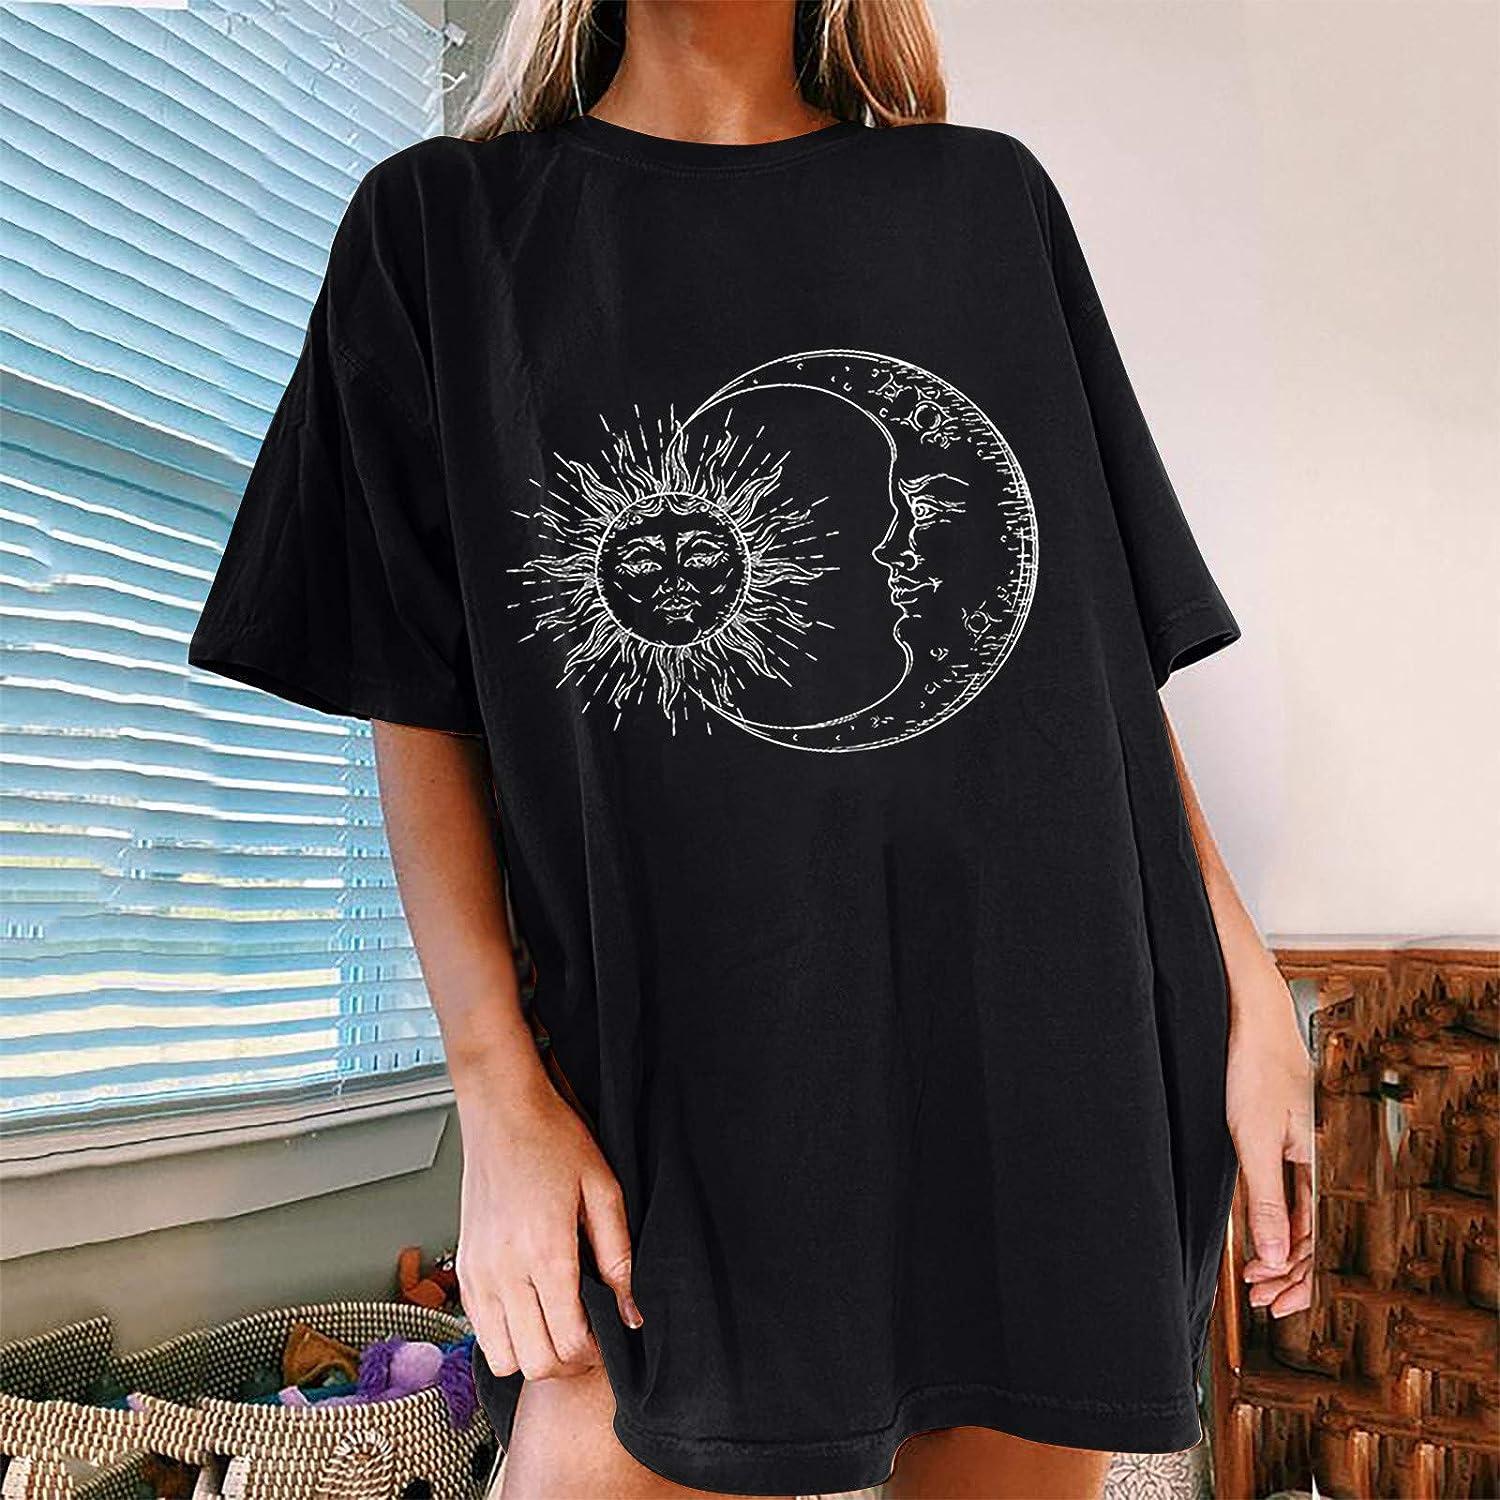 Oversized T Shirts for Women Graphic Tee, Women T-Shirts Funny Printed  Tunic Tops Short Sleeve Drop Shoulder Blouse B-black XX-Large